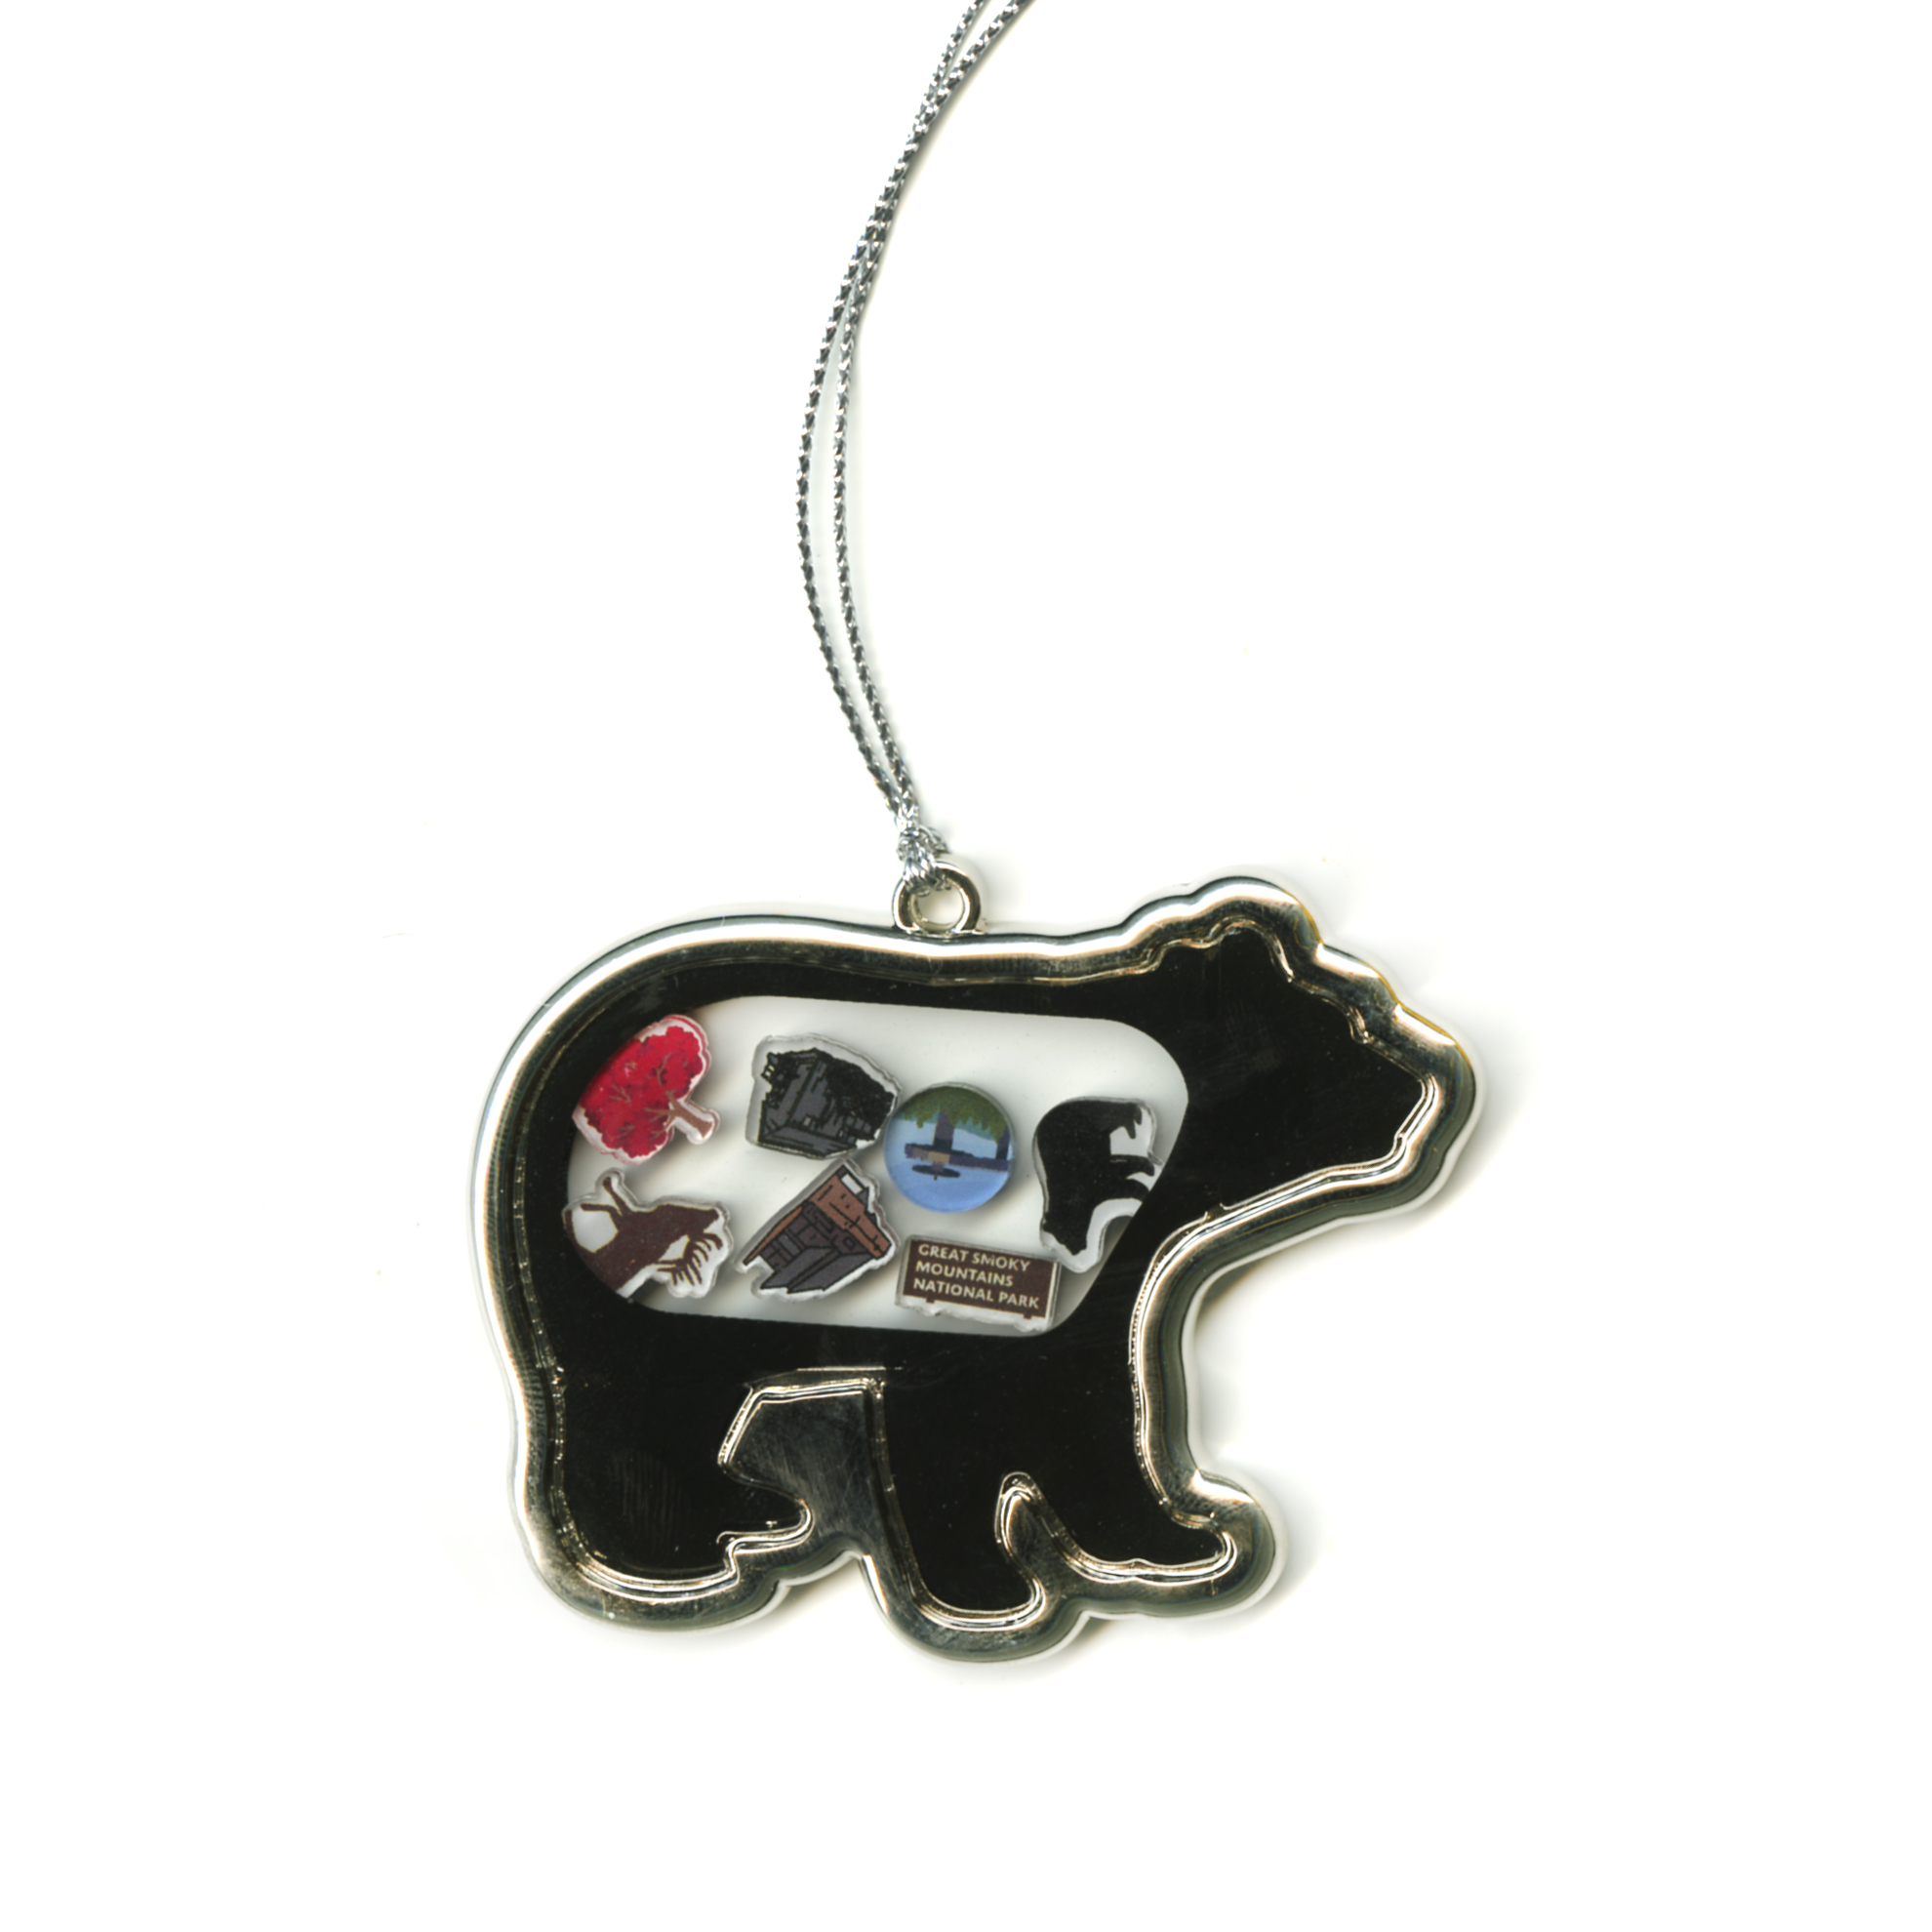 Bear Ornament with Floating Charms - GSMA